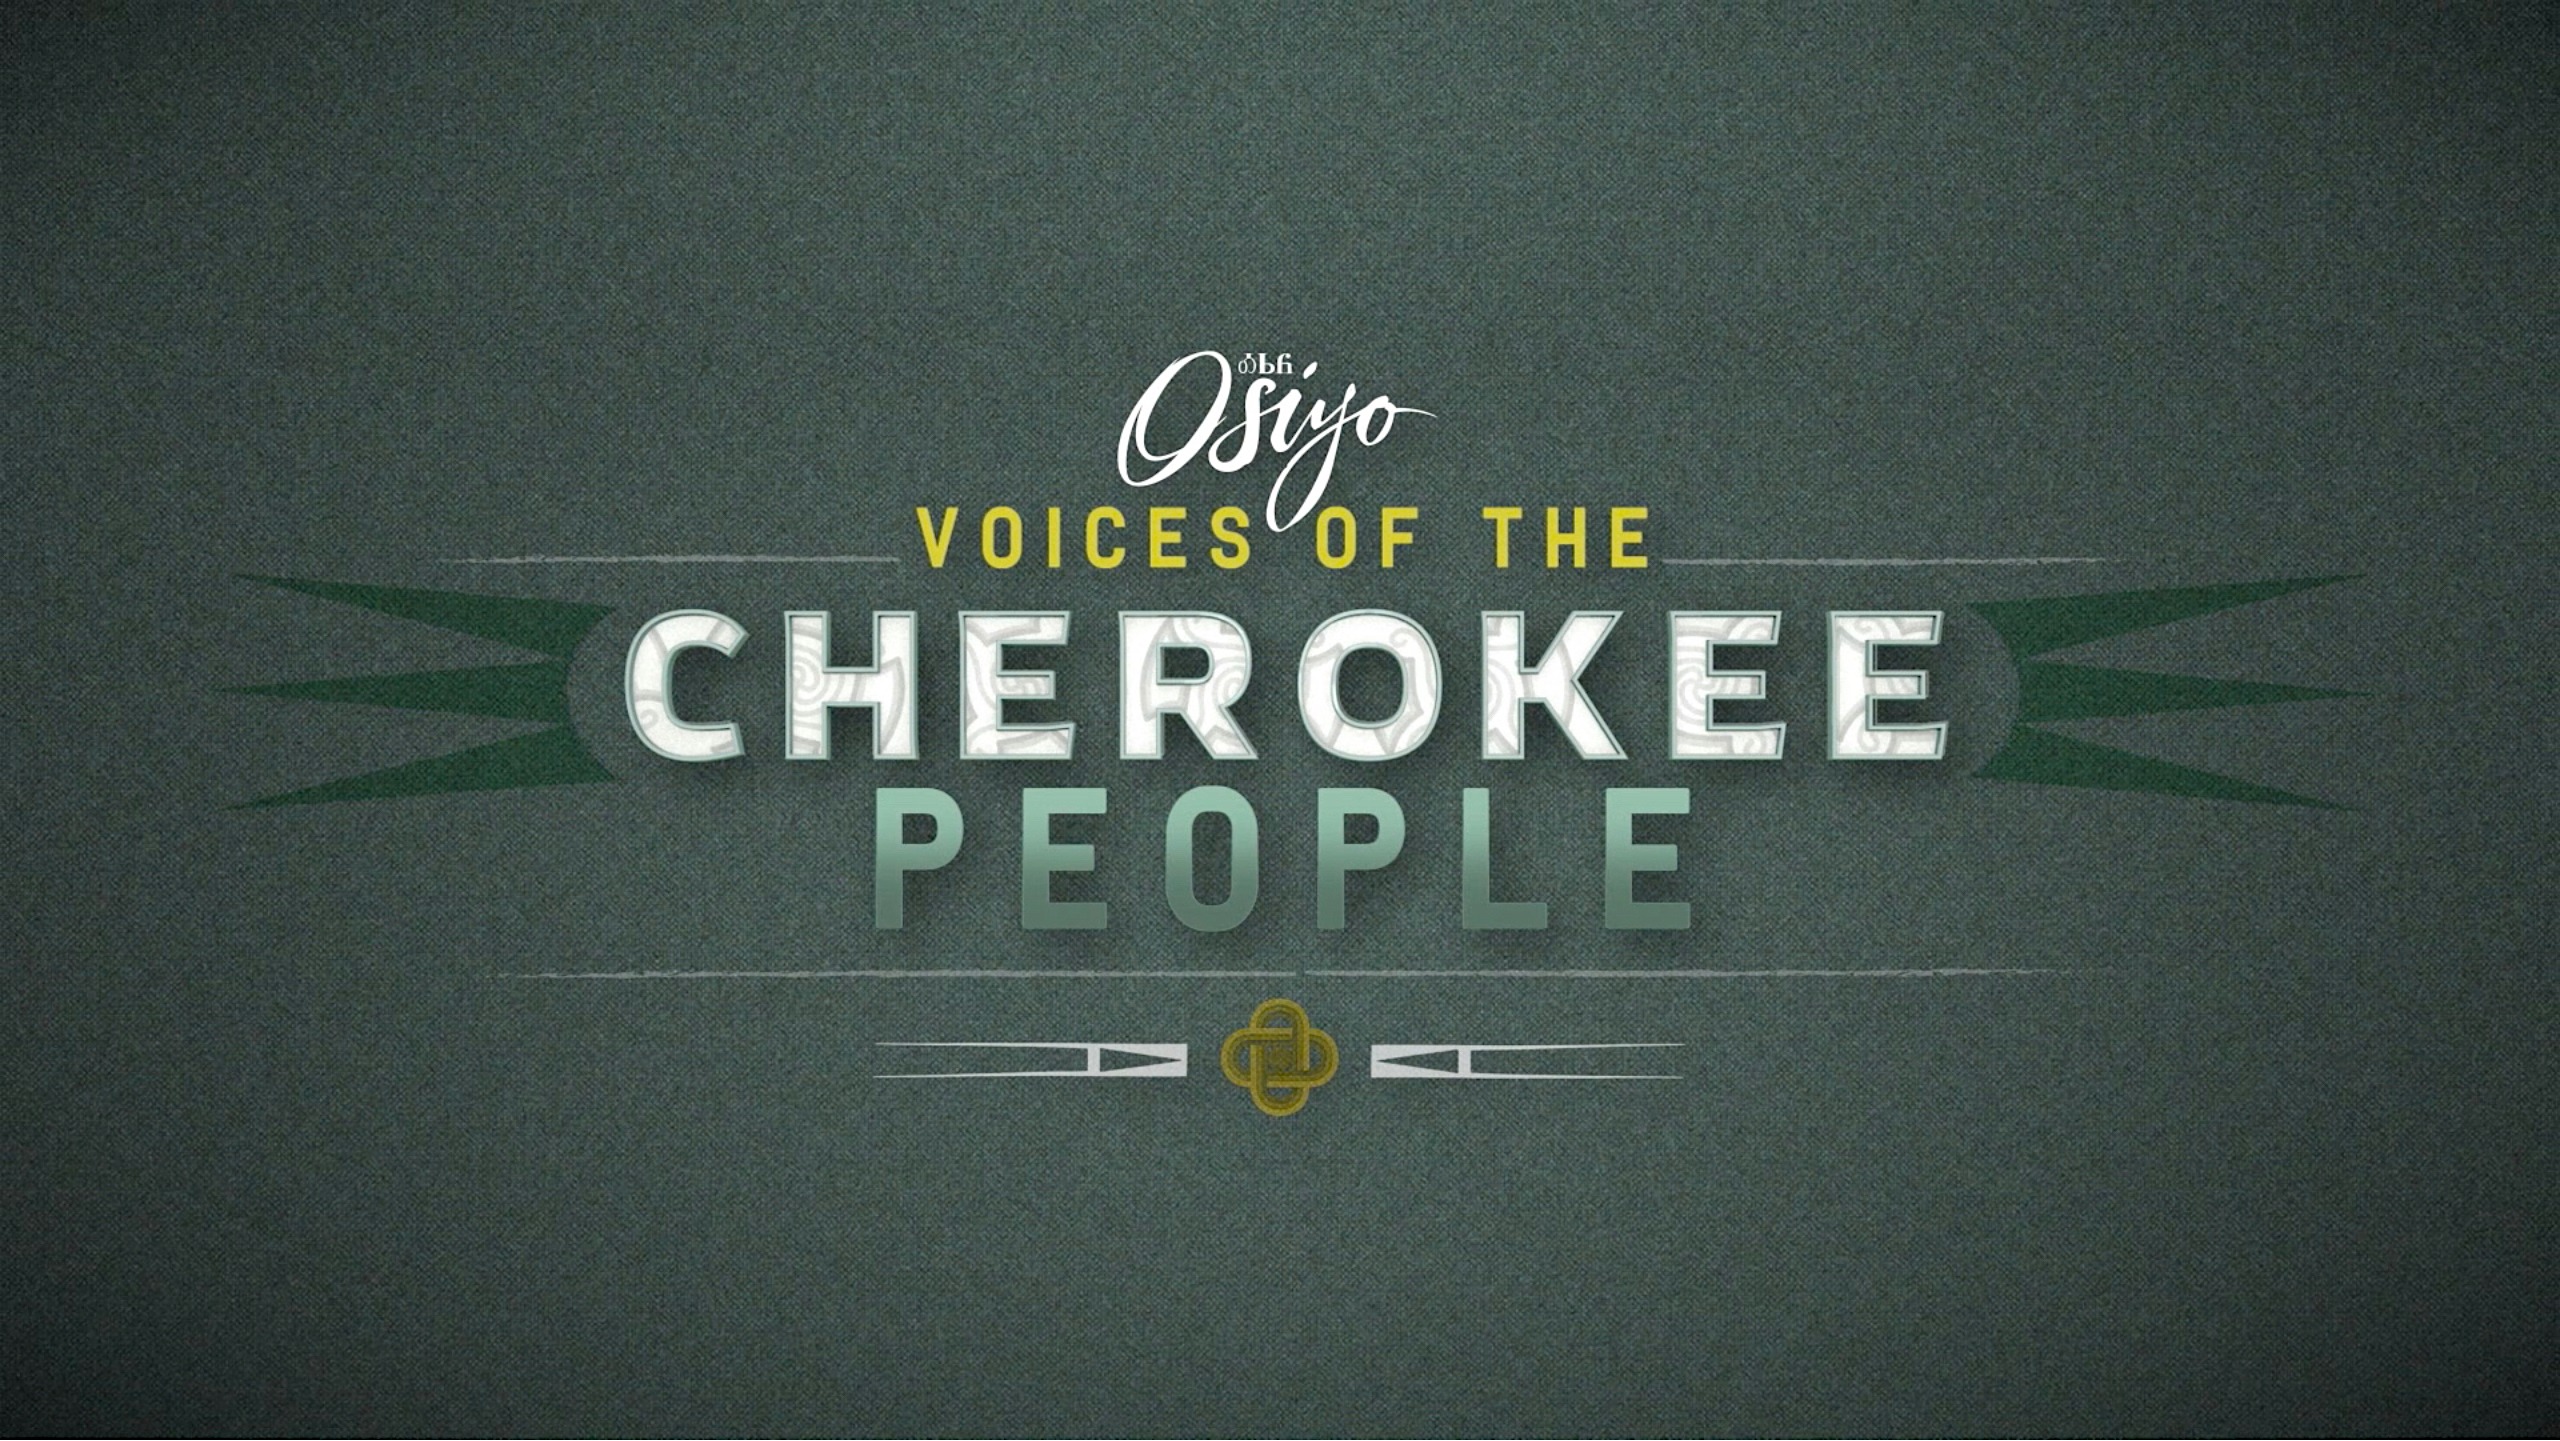 Osiyo, Voices of the Cherokee People  - Logo - https://s39939.pcdn.co/wp-content/uploads/2019/04/OsiyoTV_main_logo_hi-res.large_.jpg